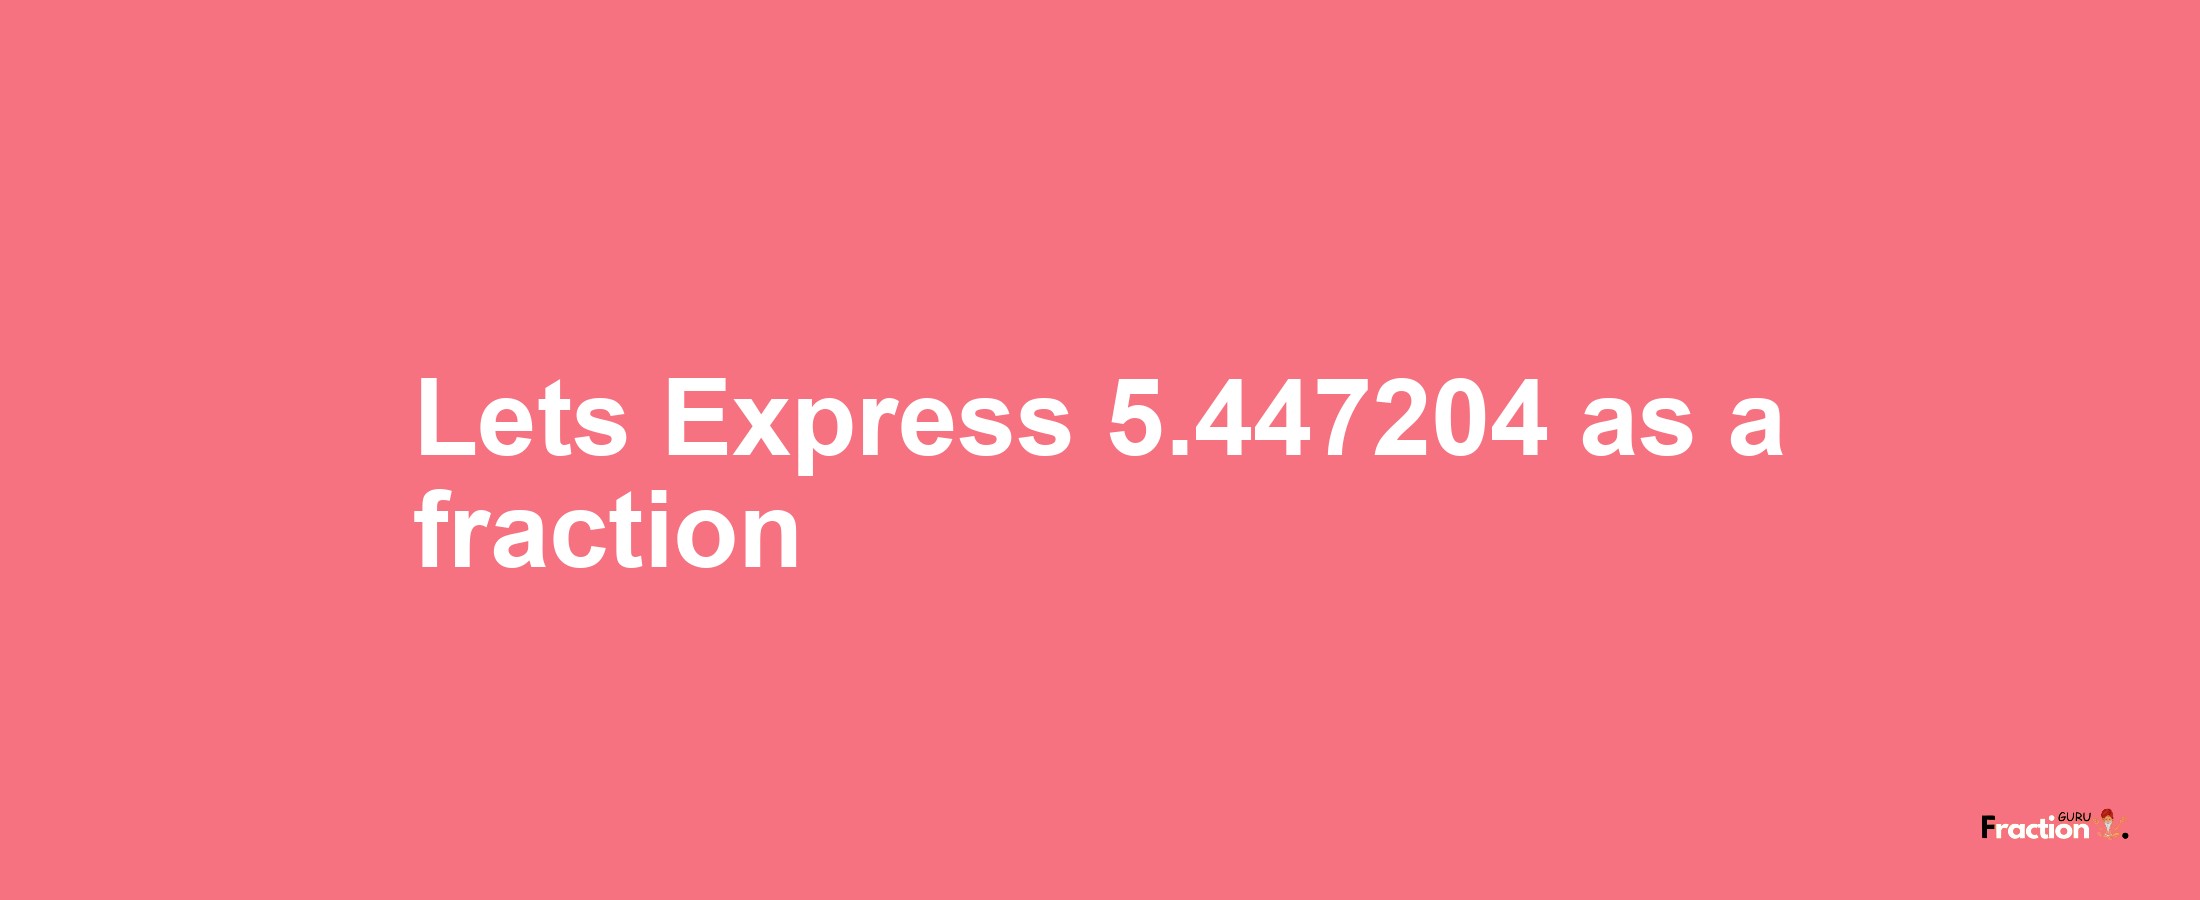 Lets Express 5.447204 as afraction